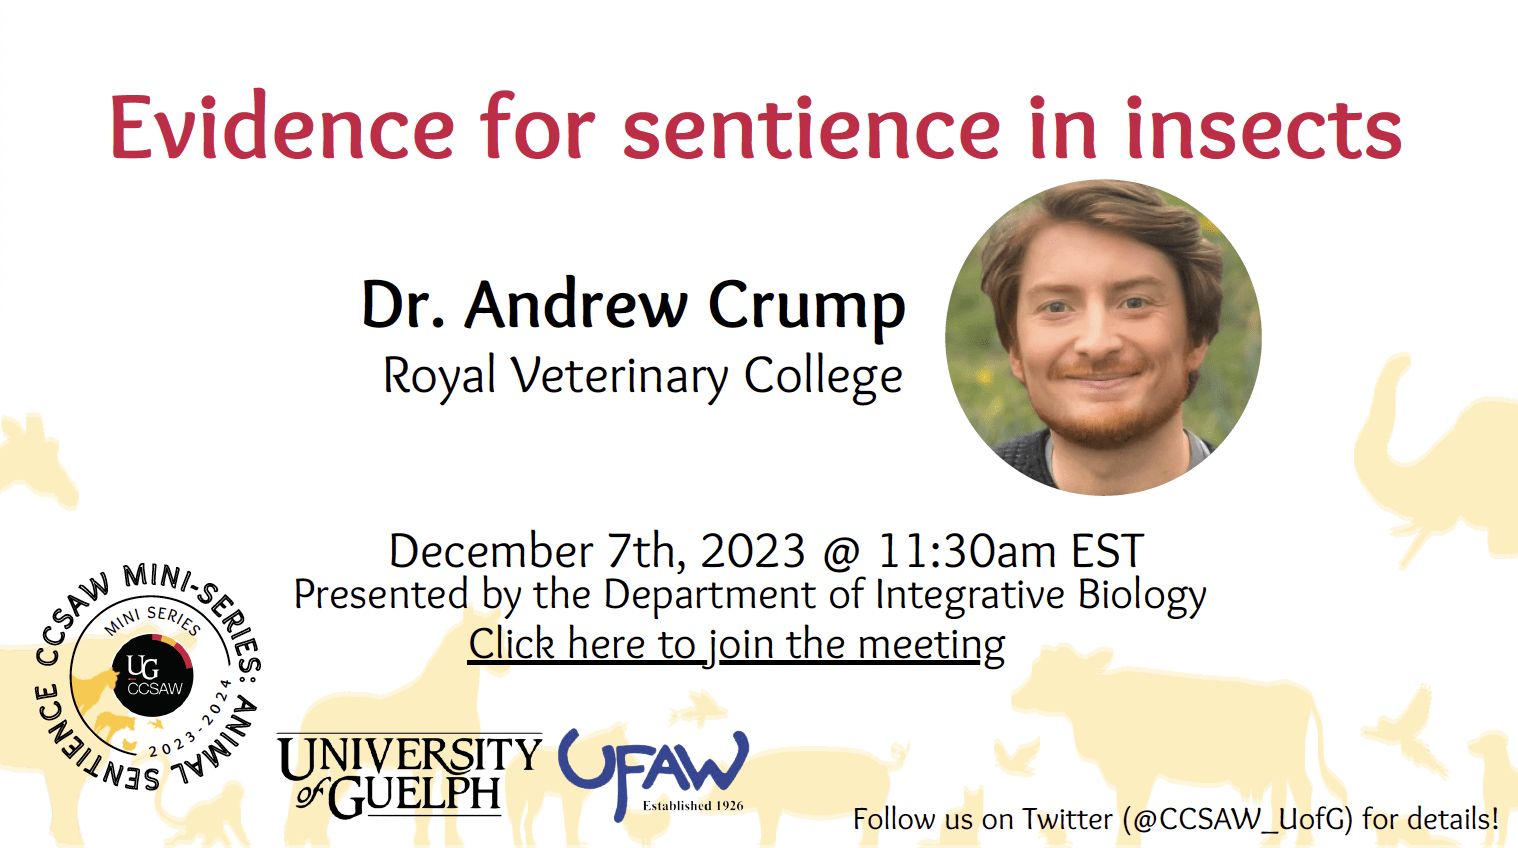 Evidence for sentience in insects with Dr. Andrew Crump from Royal Veterinary College.